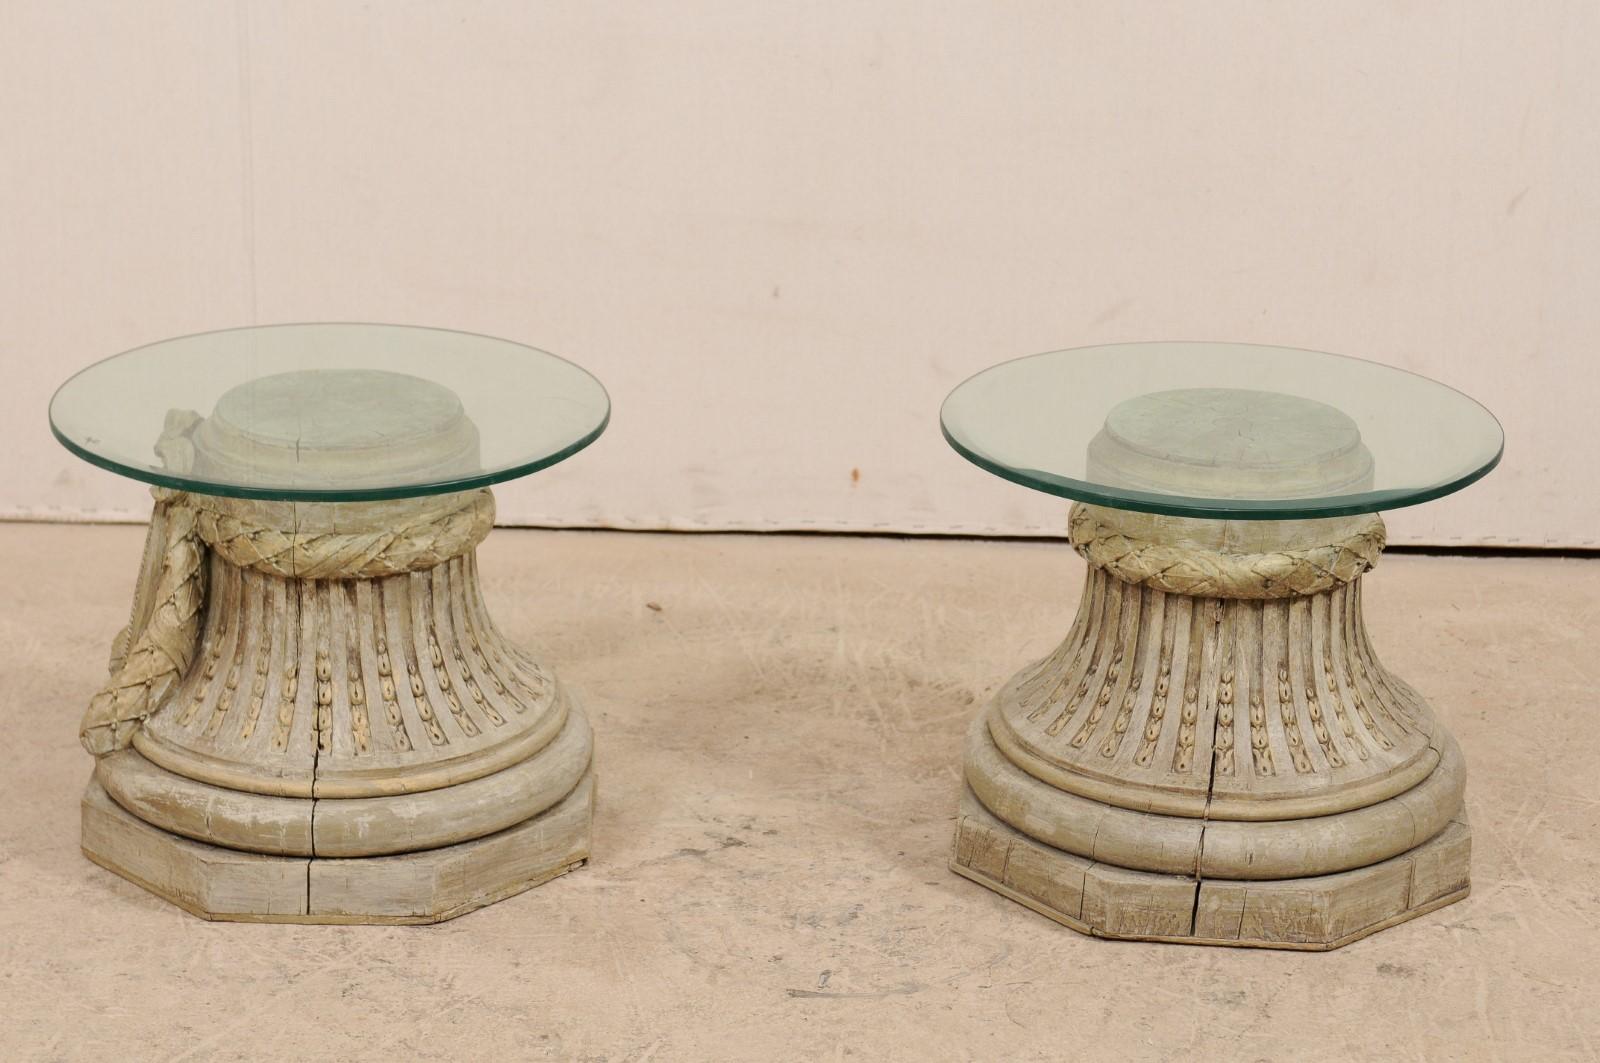 A pair of French capital bases, from the early to mid-20th century, with round glass tops. This pair of small-sized coffee tables have been fashioned from a pair of French capital bases, carved with wreathed bow, fluted sides with chandelles, and an